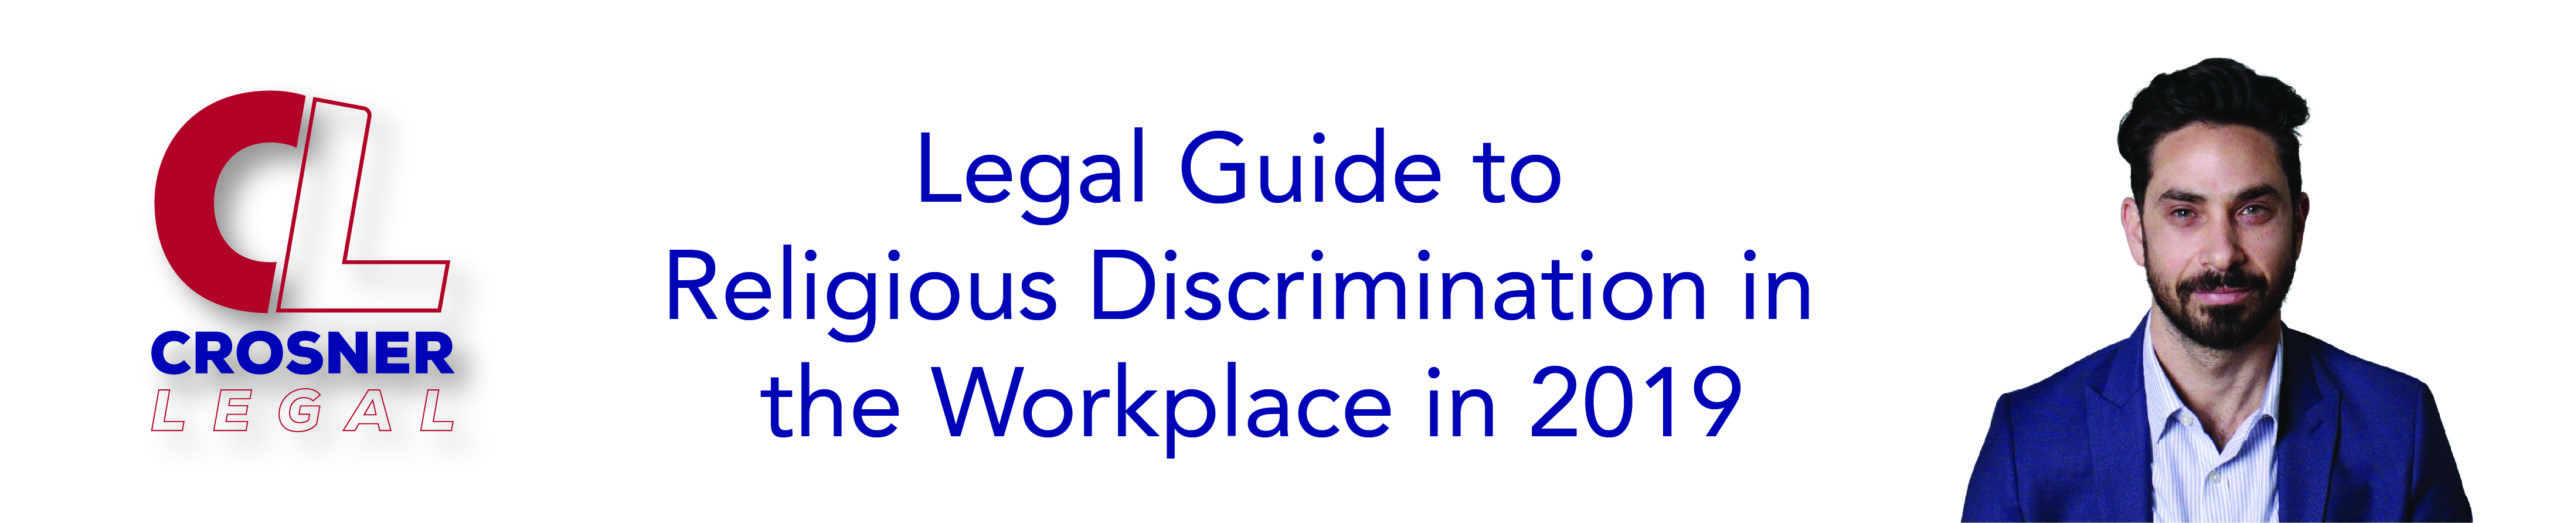 Legal Guide to Religious Discrimination in the Workplace in 2019